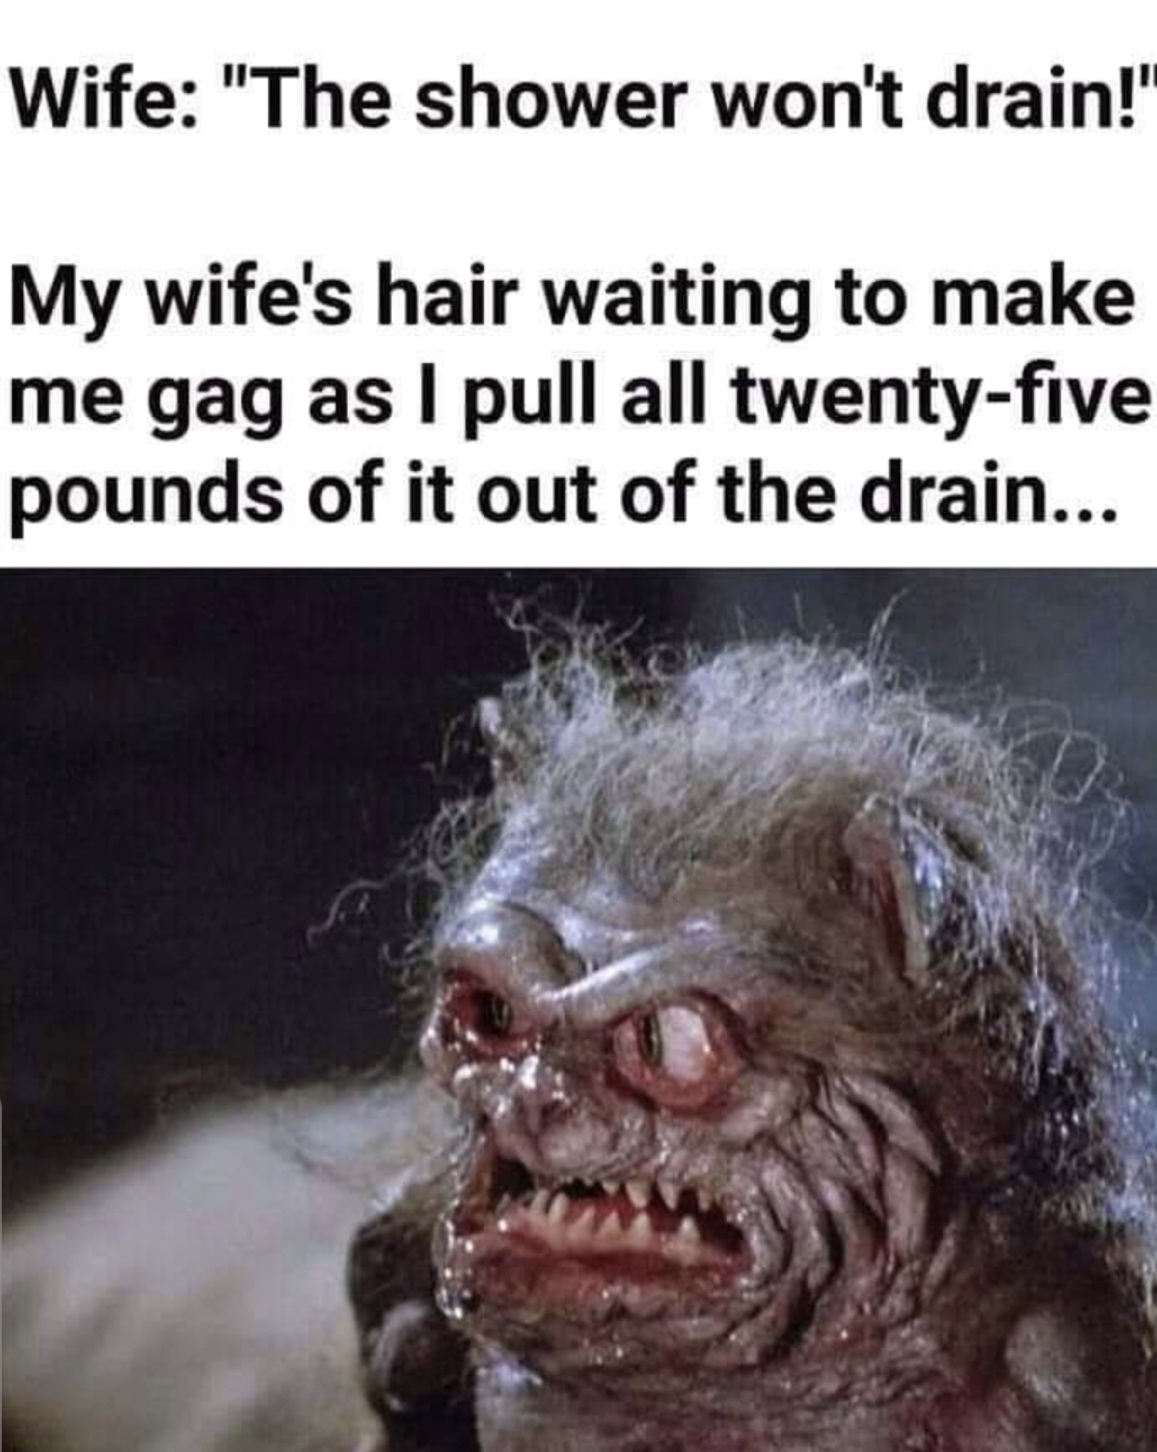 my wifes hair in the drain meme - Wife "The shower won't drain!" My wife's hair waiting to make me gag as I pull all twentyfive pounds of it out of the drain...